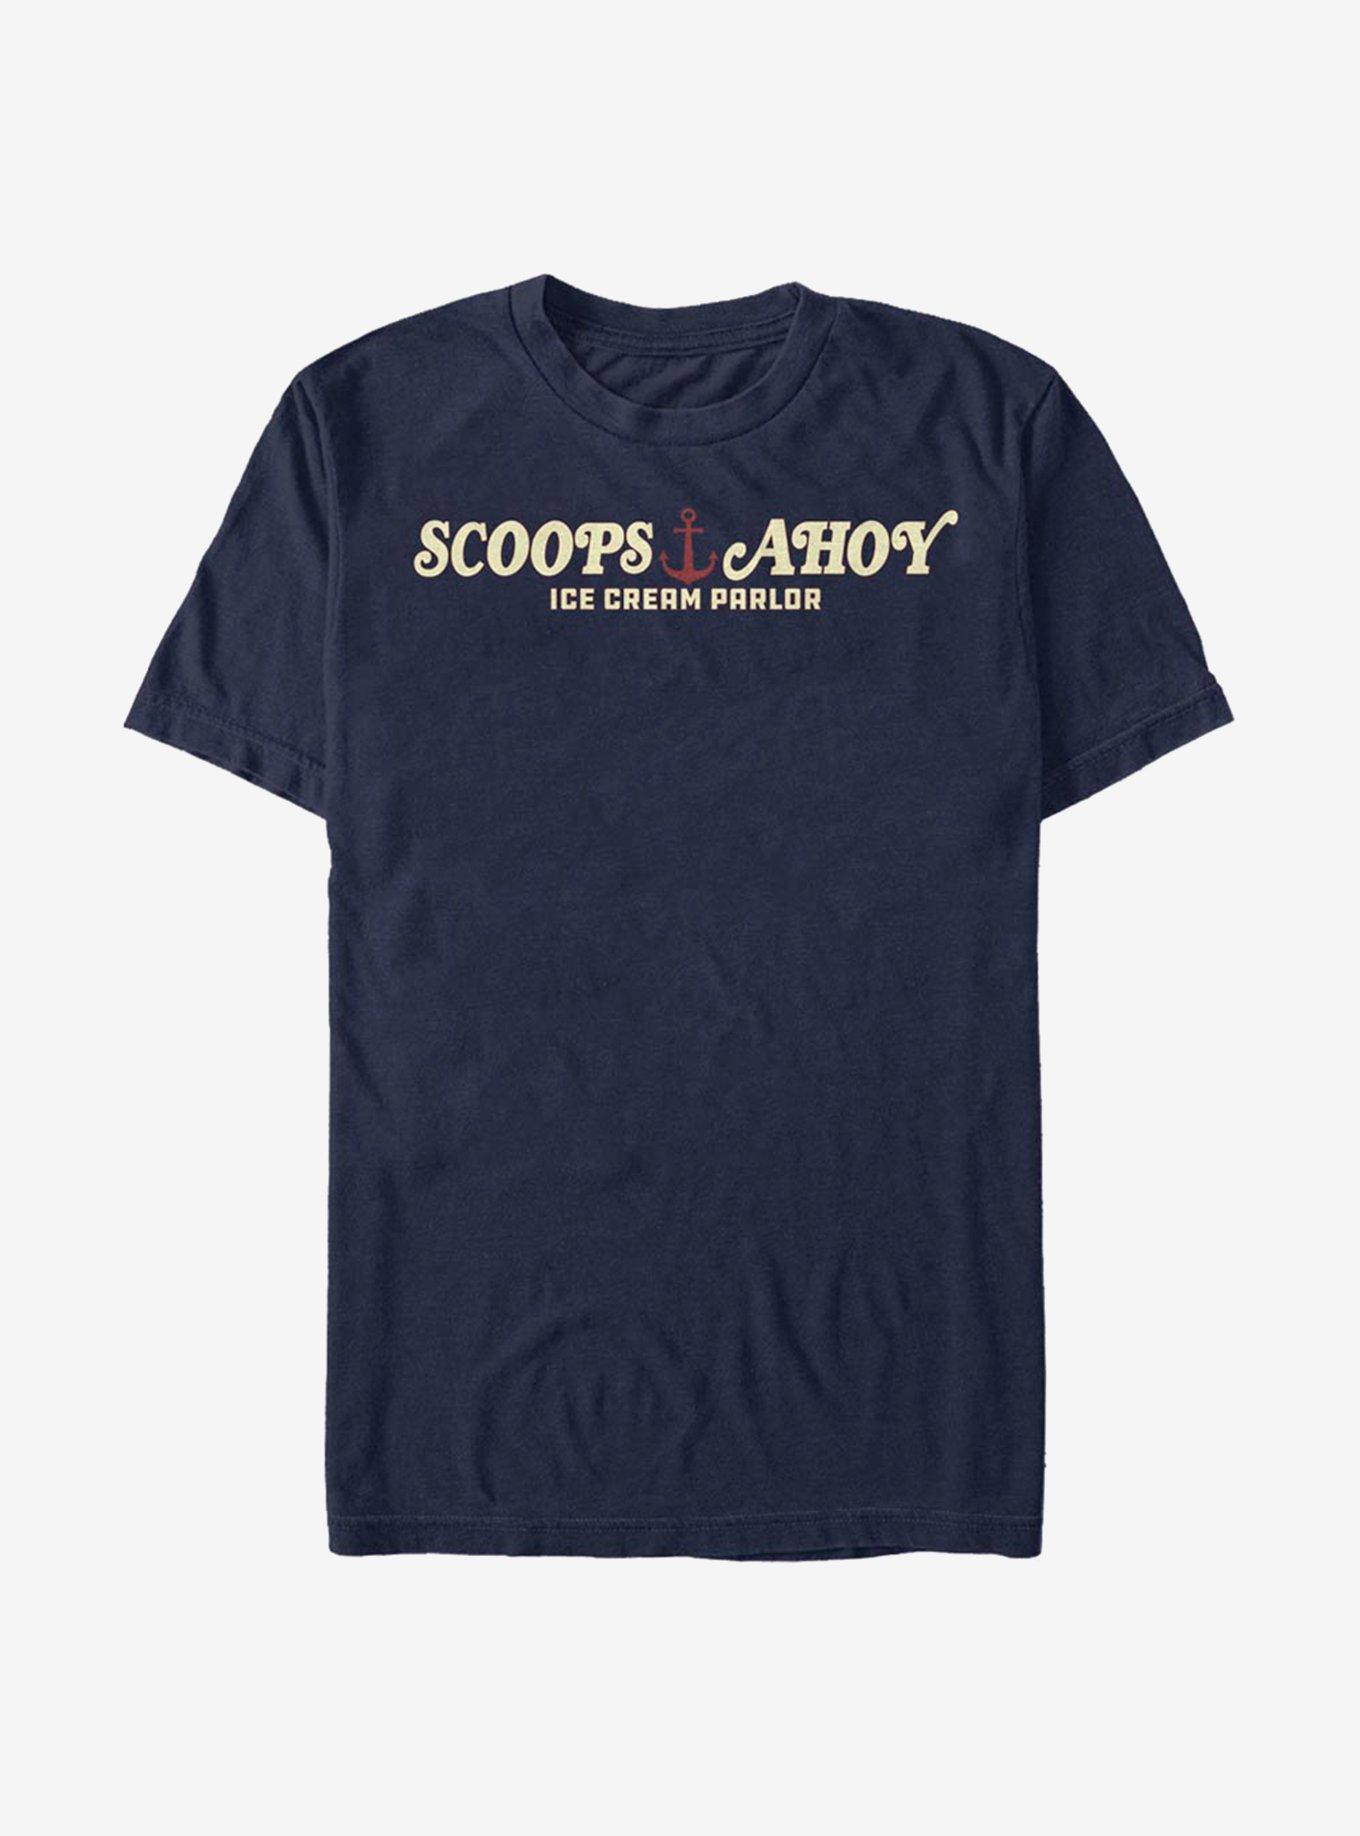 Extra Soft Stranger Things Scoops Ahoy T-Shirt, NAVY, hi-res